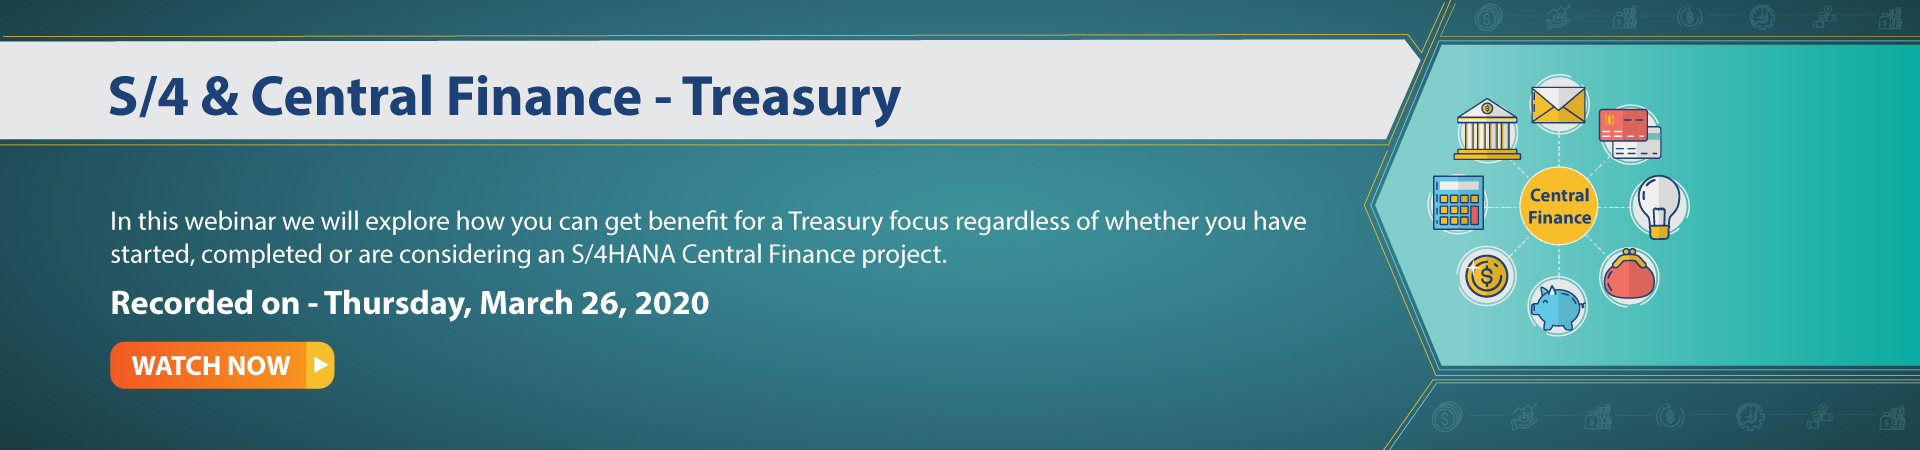 S/4 & Central Finance – Treasury Banner